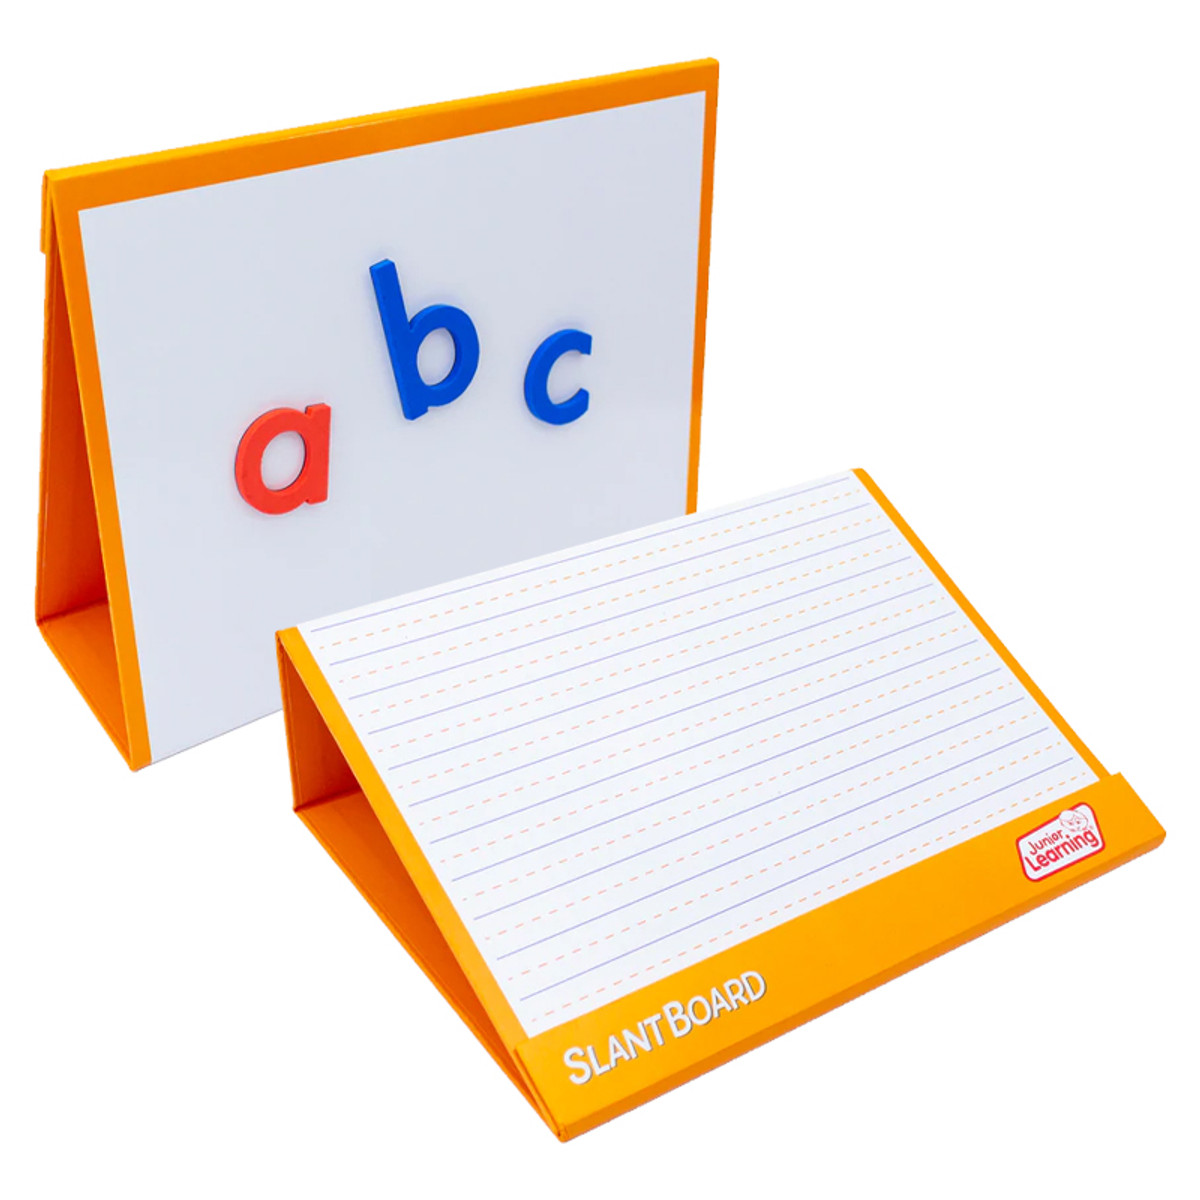 Magnetic Slant Board two boards one with a writing surface and one with a magnetic surface